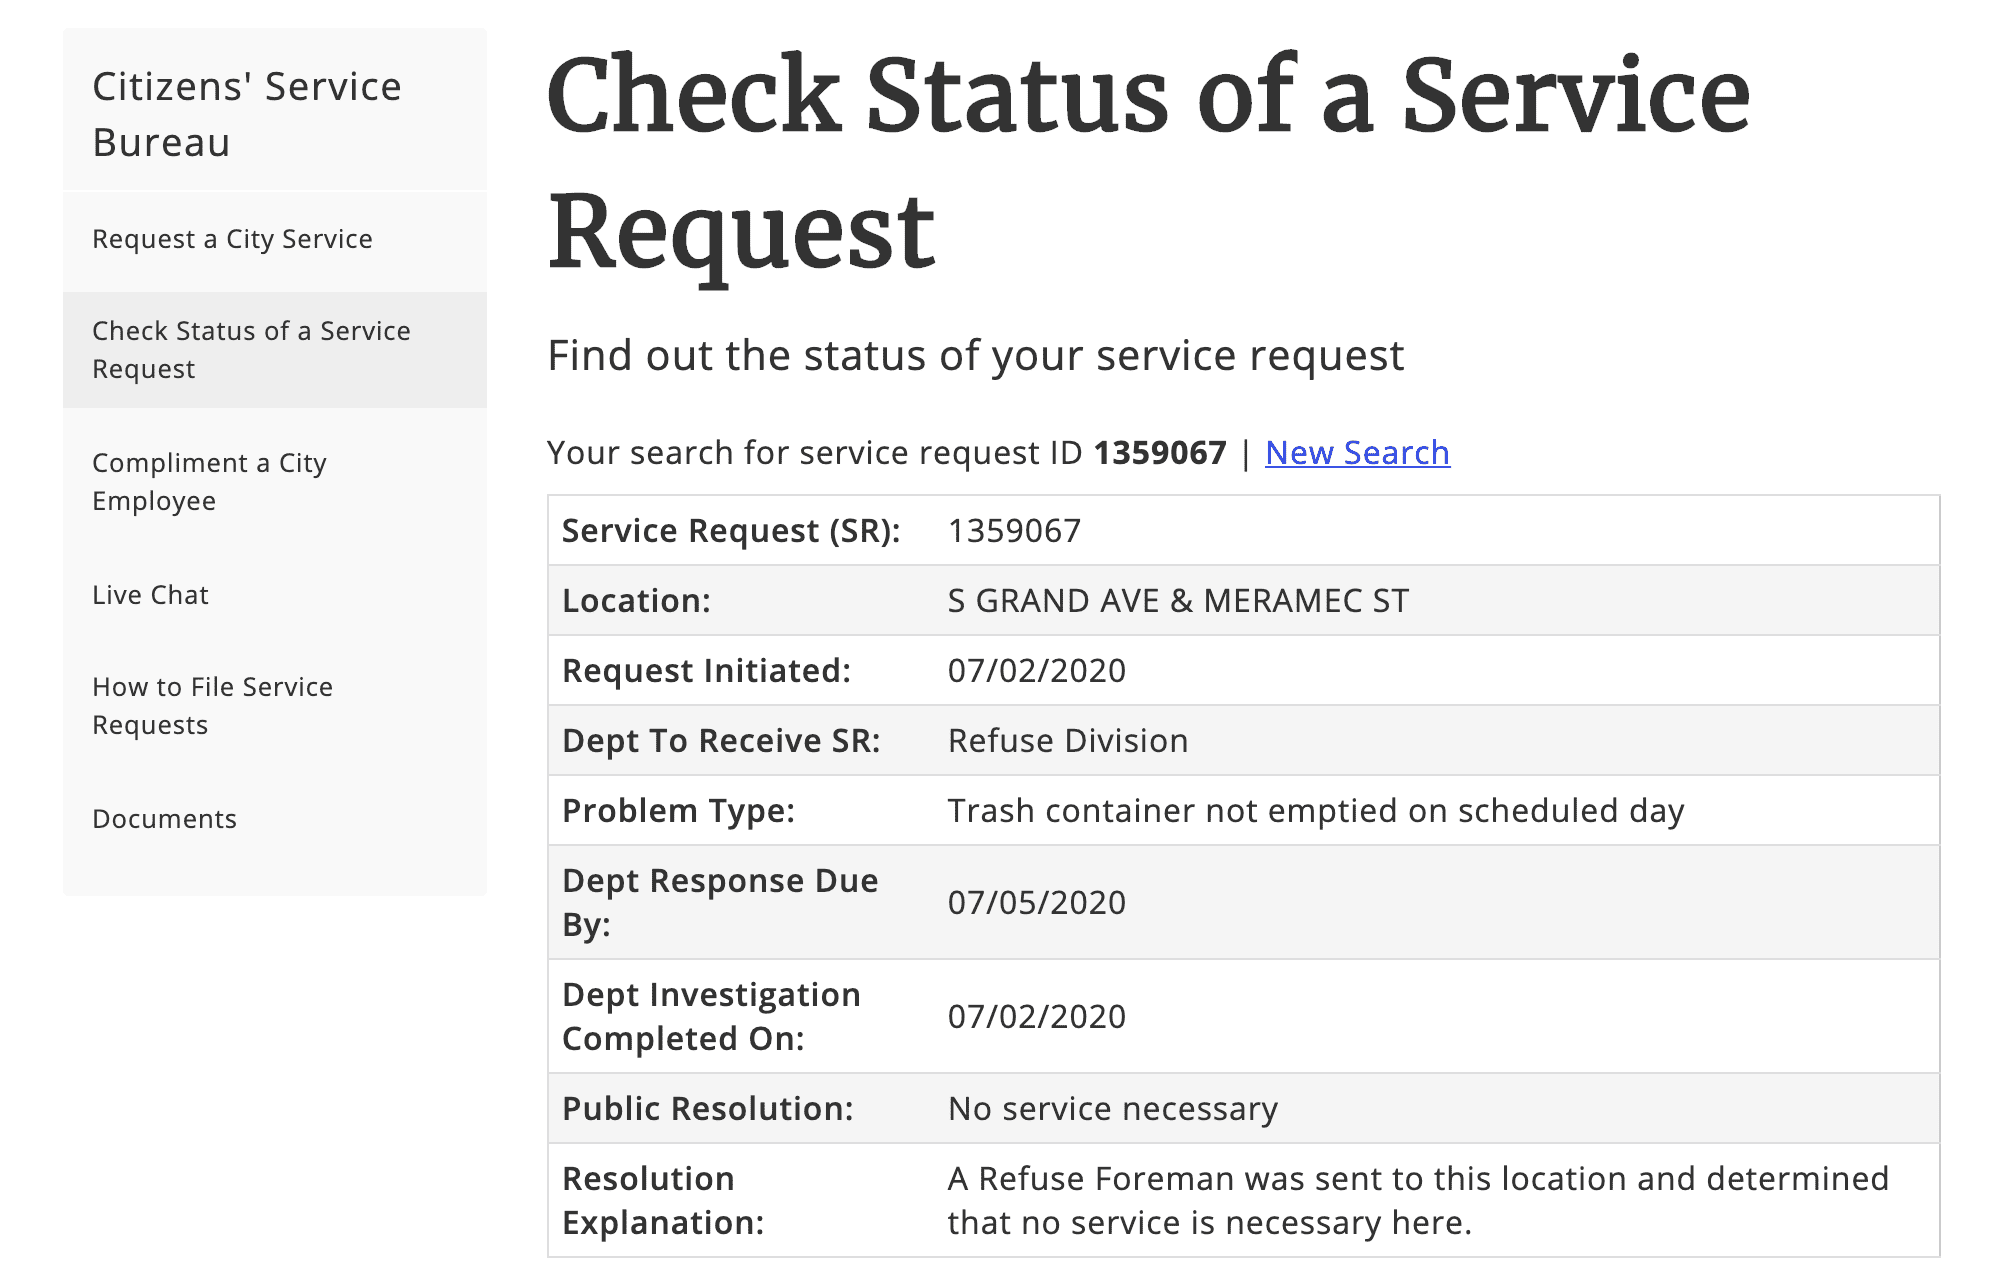 Checking the status of a service request on the Citizens' Service Bureau website.